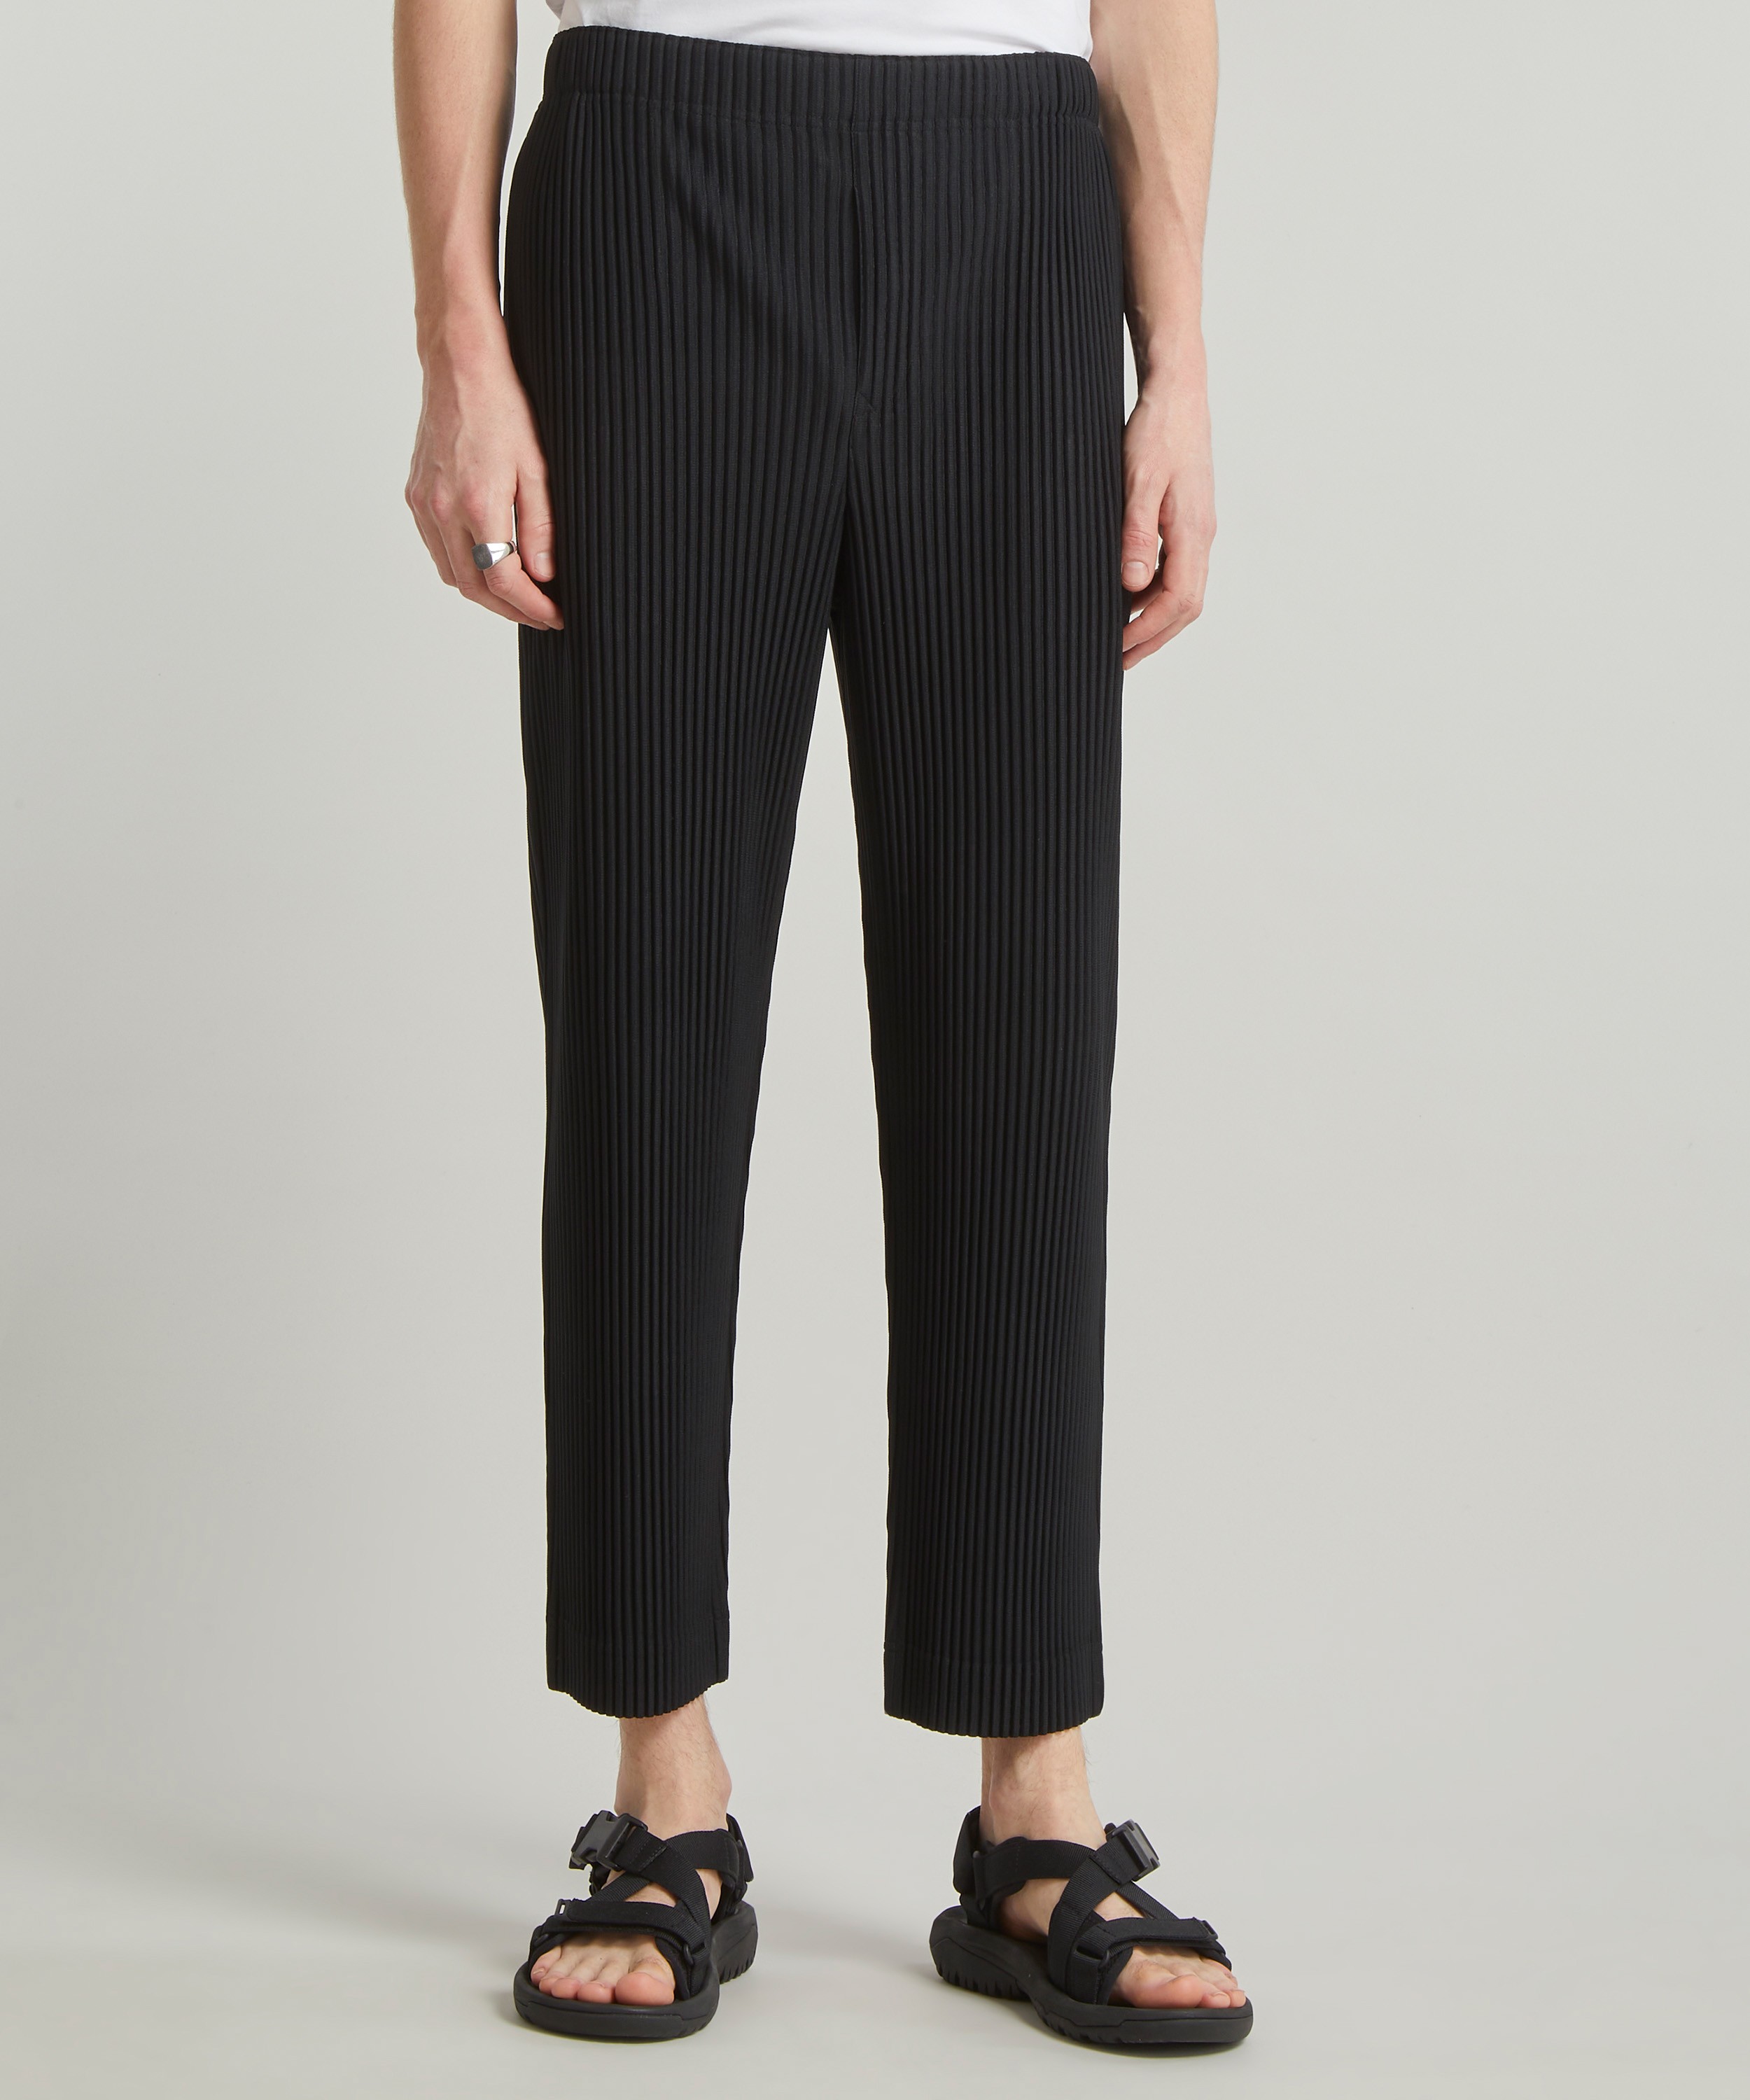 HOMME PLISSÉ ISSEY MIYAKE Pleated Slim-Fit Trousers | Liberty